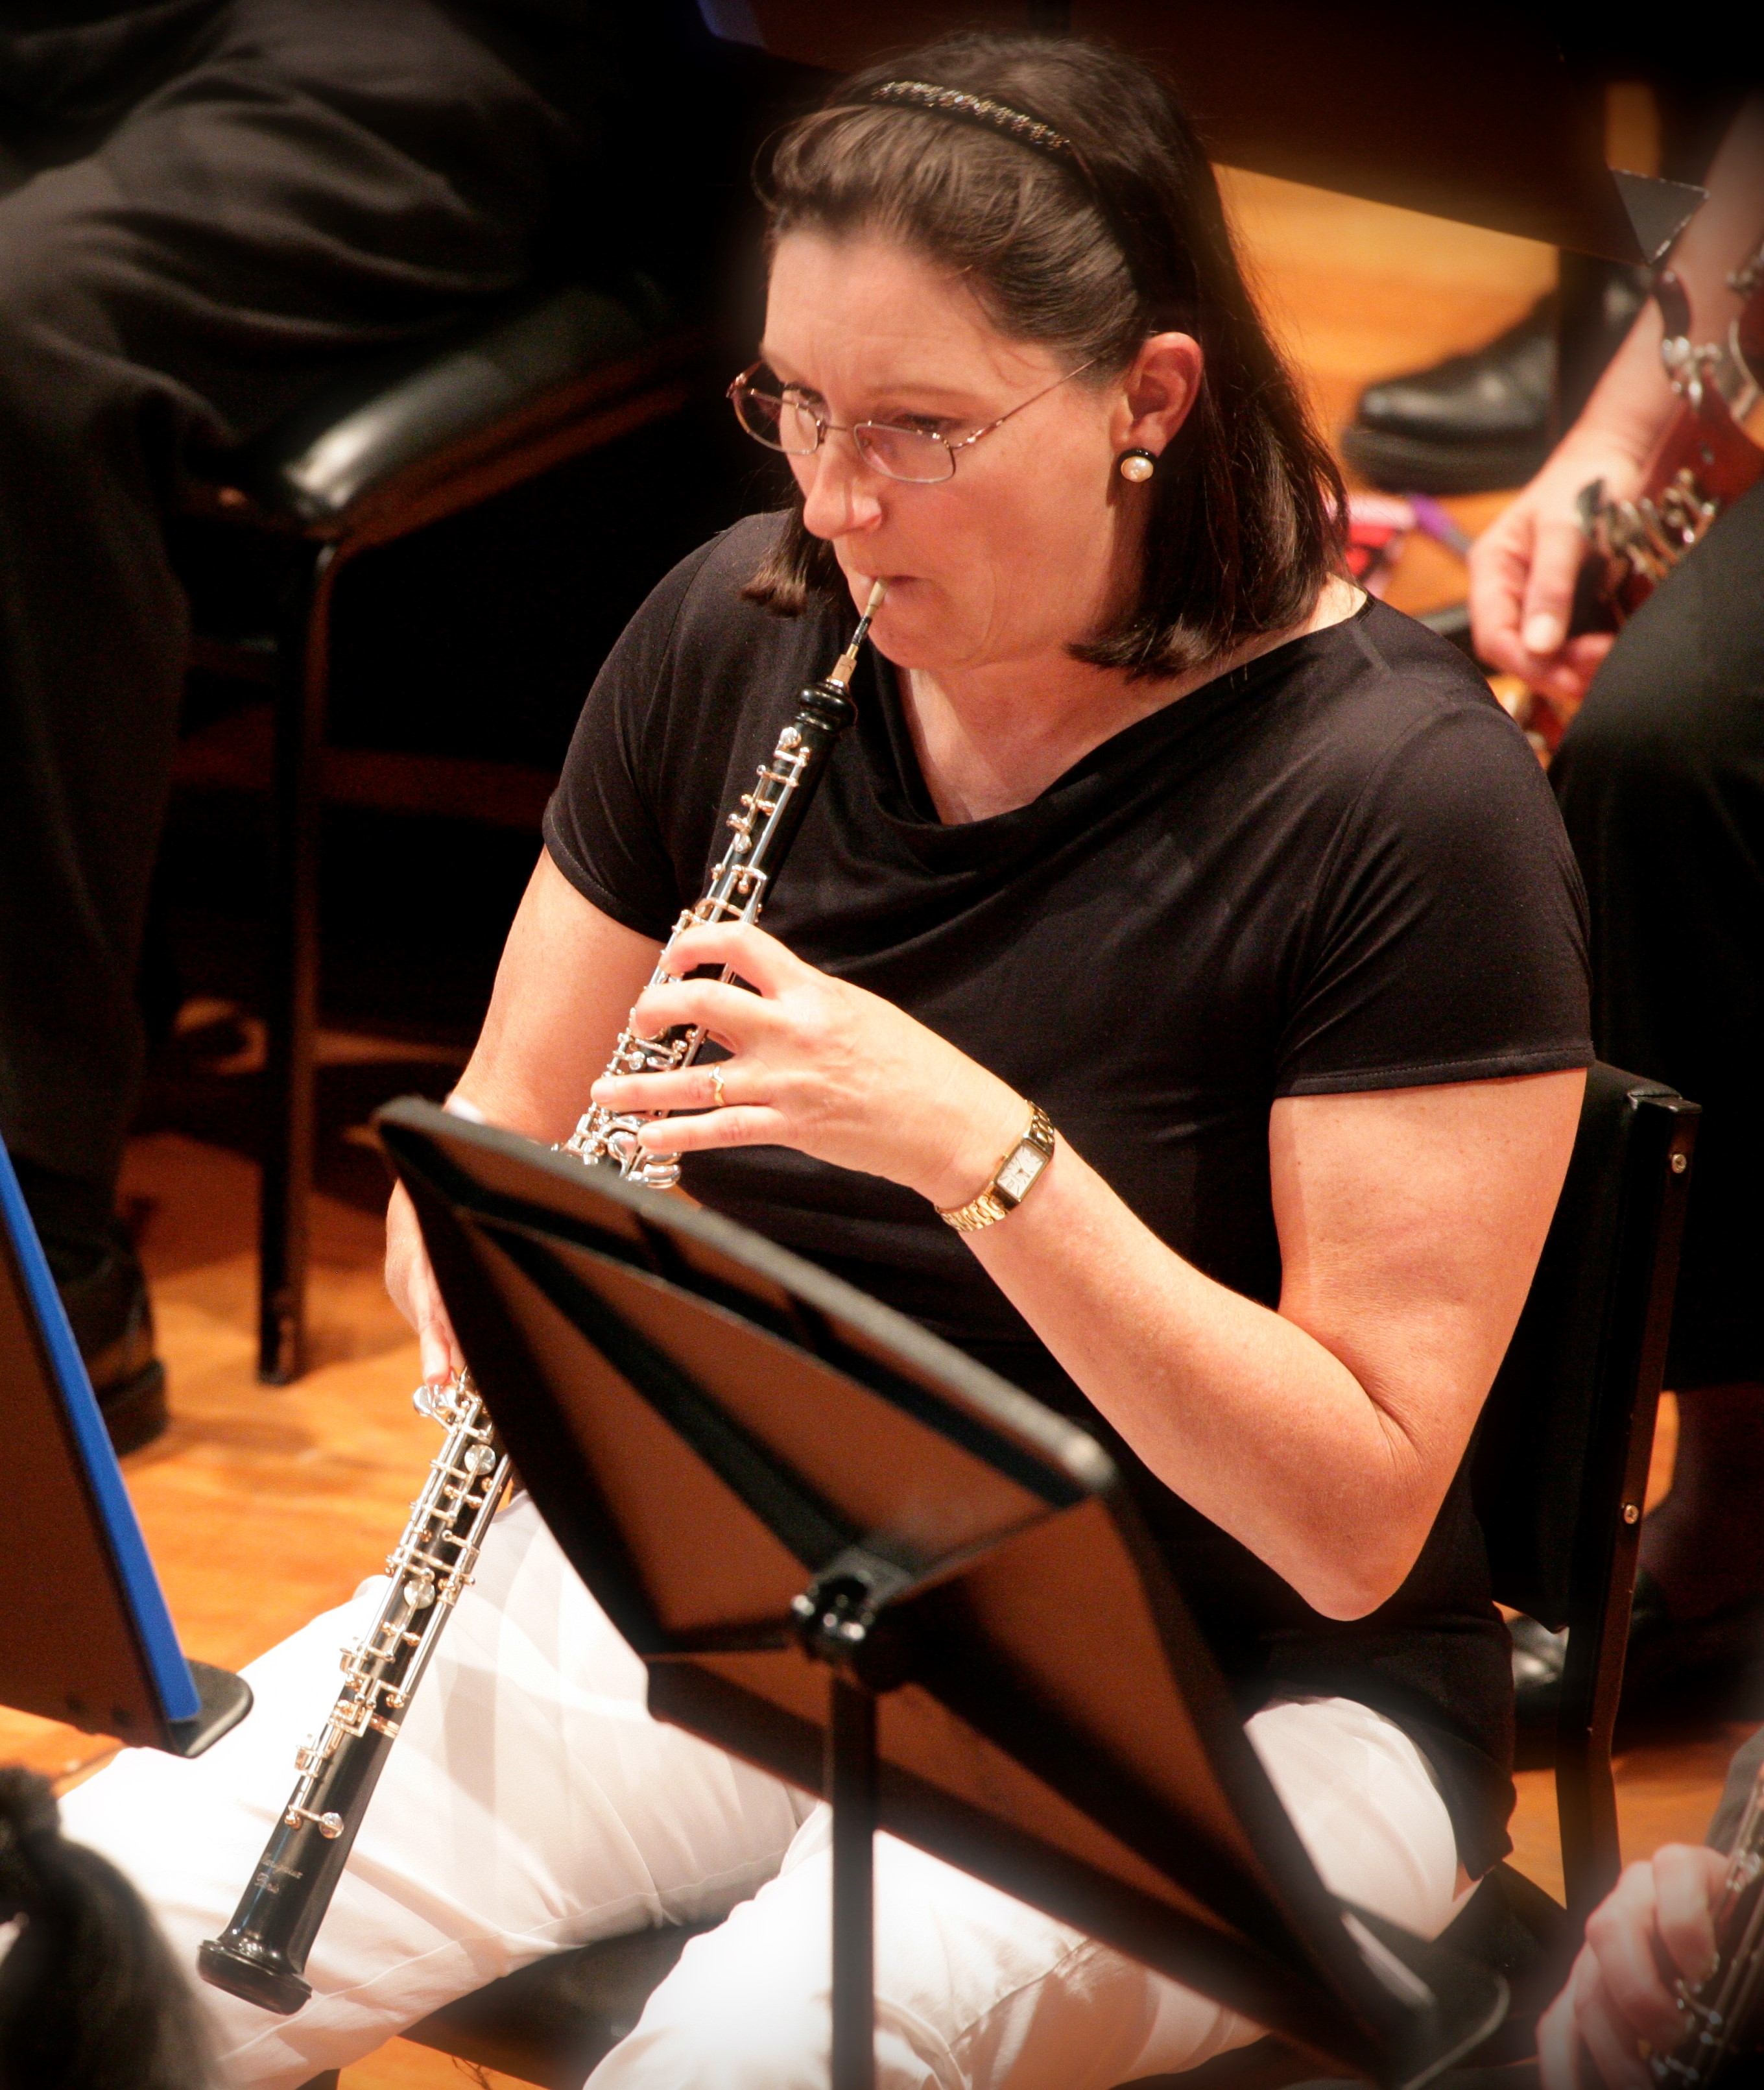 The Oboe And The Steth – Playing In The NSW Drs Orchestra